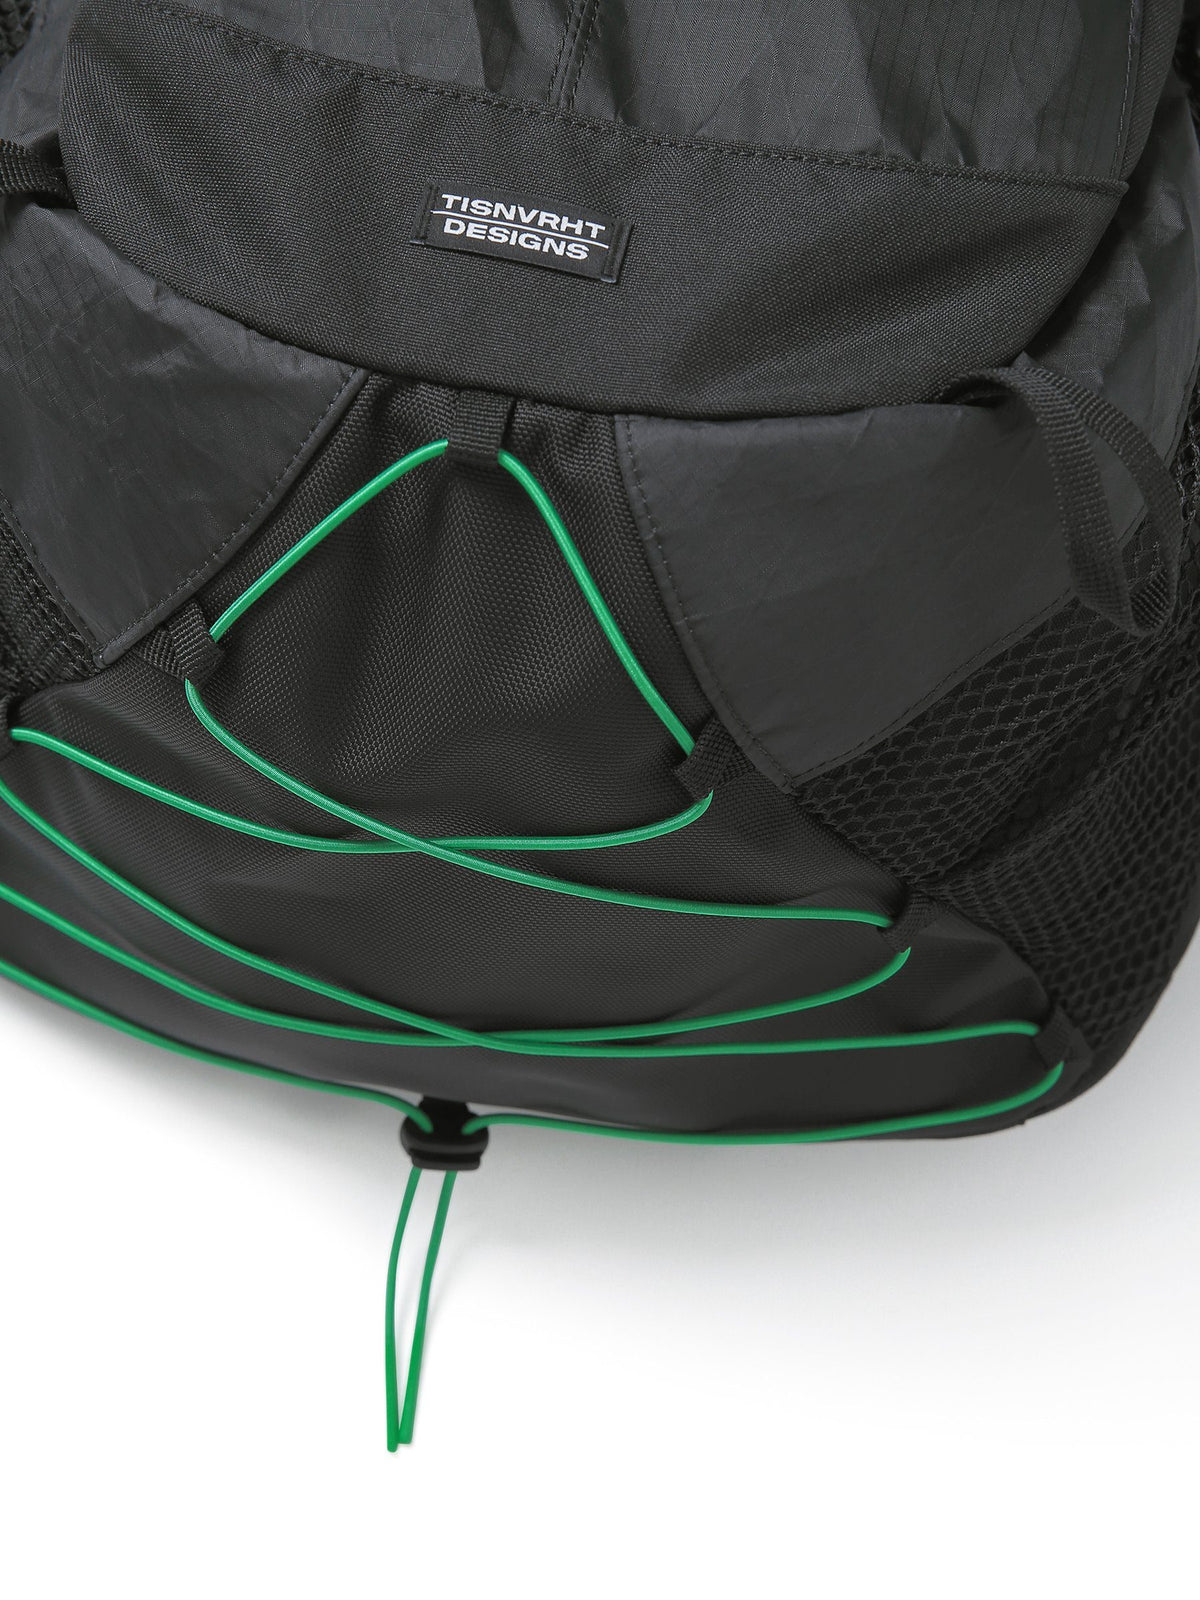 X-Pac™ SP Backpack 33 Bag